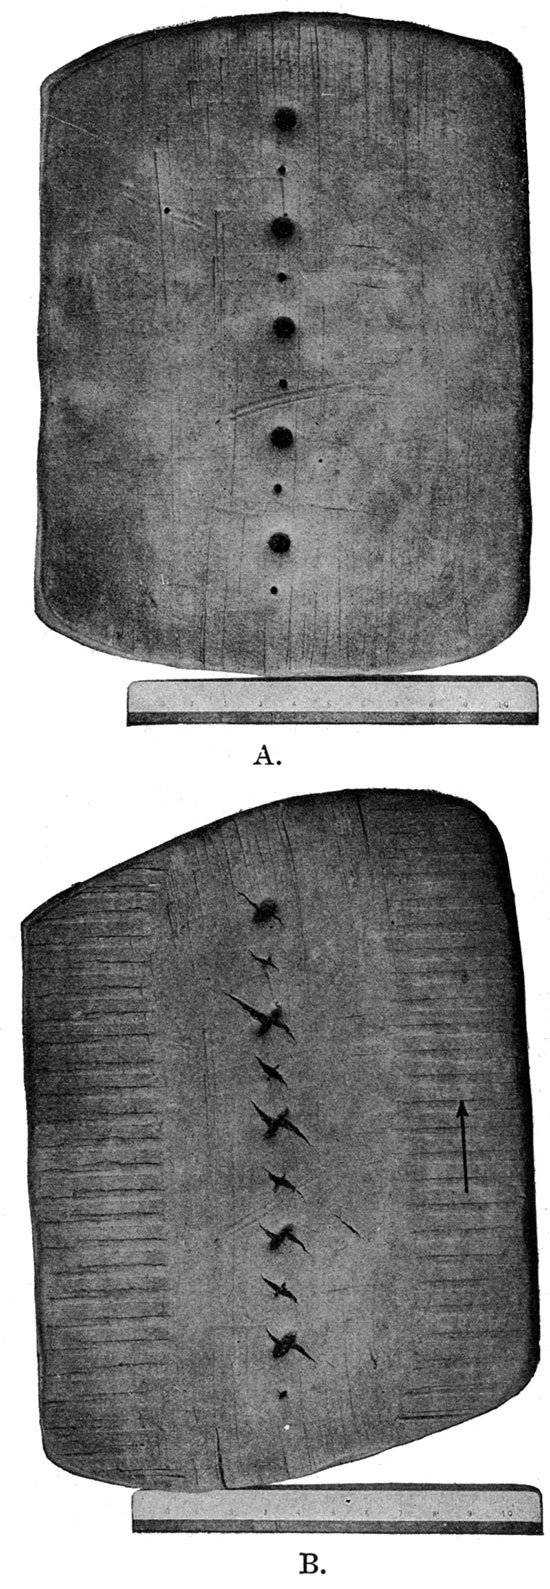 Clay model showing en echelon fractures. A flat mass of modeling clay pierced by several conical holes, before and after being deformed.